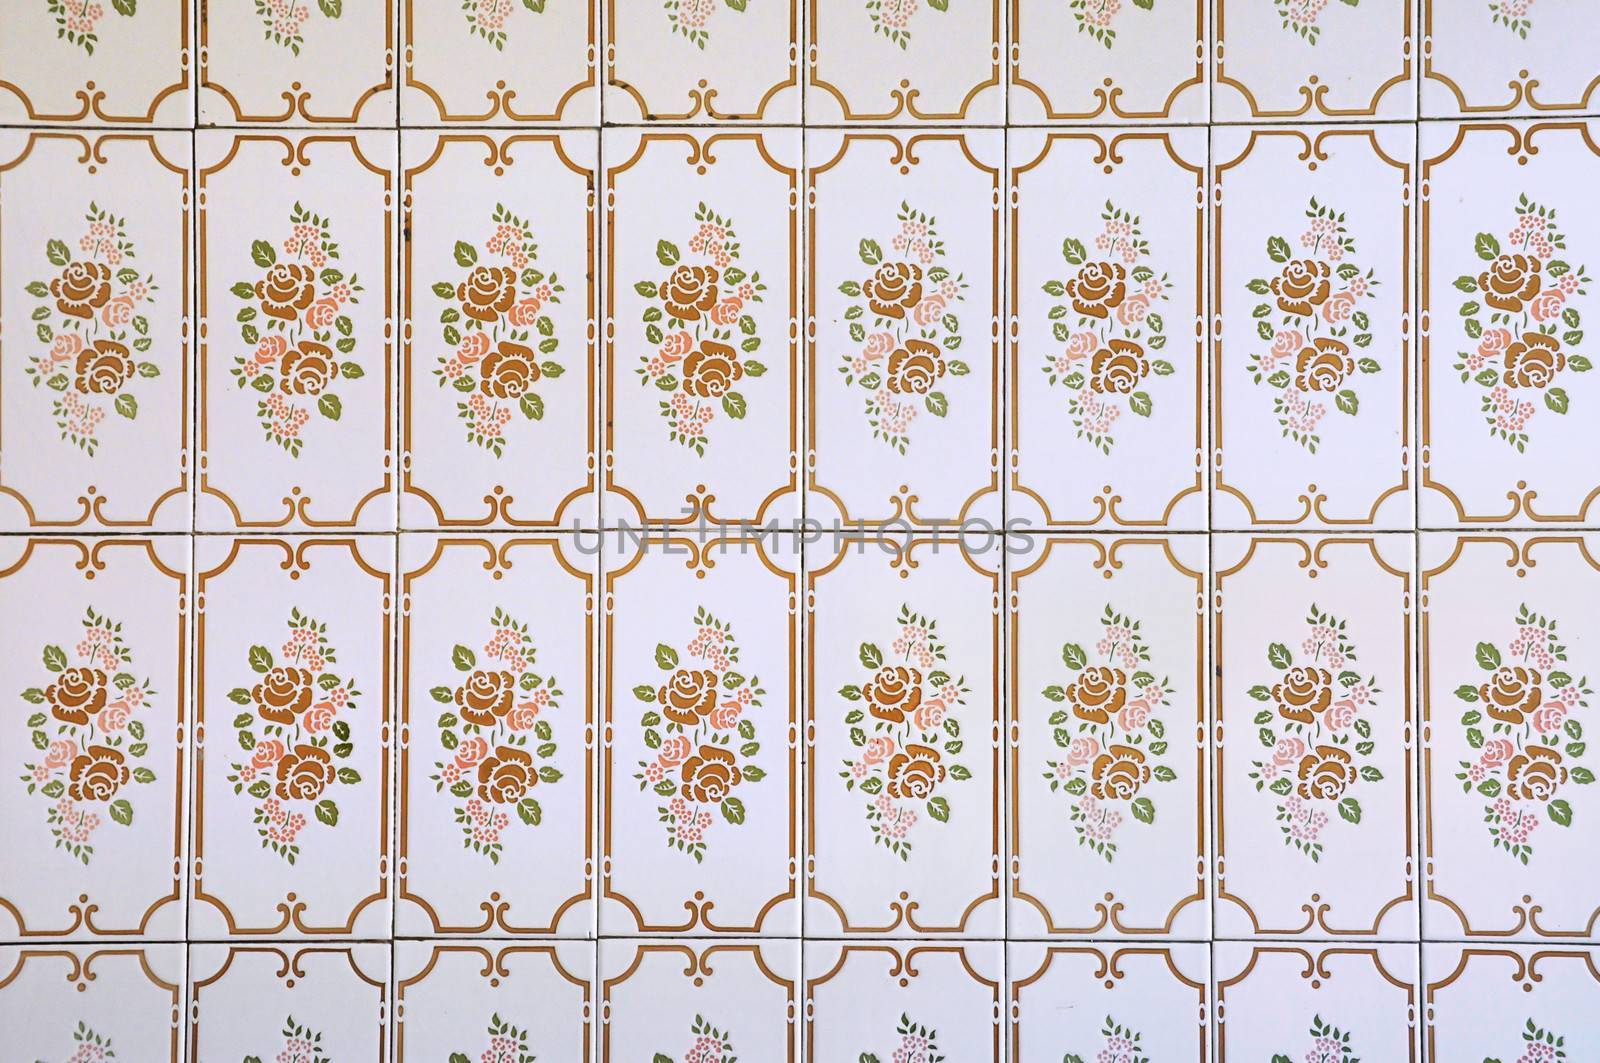 vintage tiles with floral pattern by sirylok